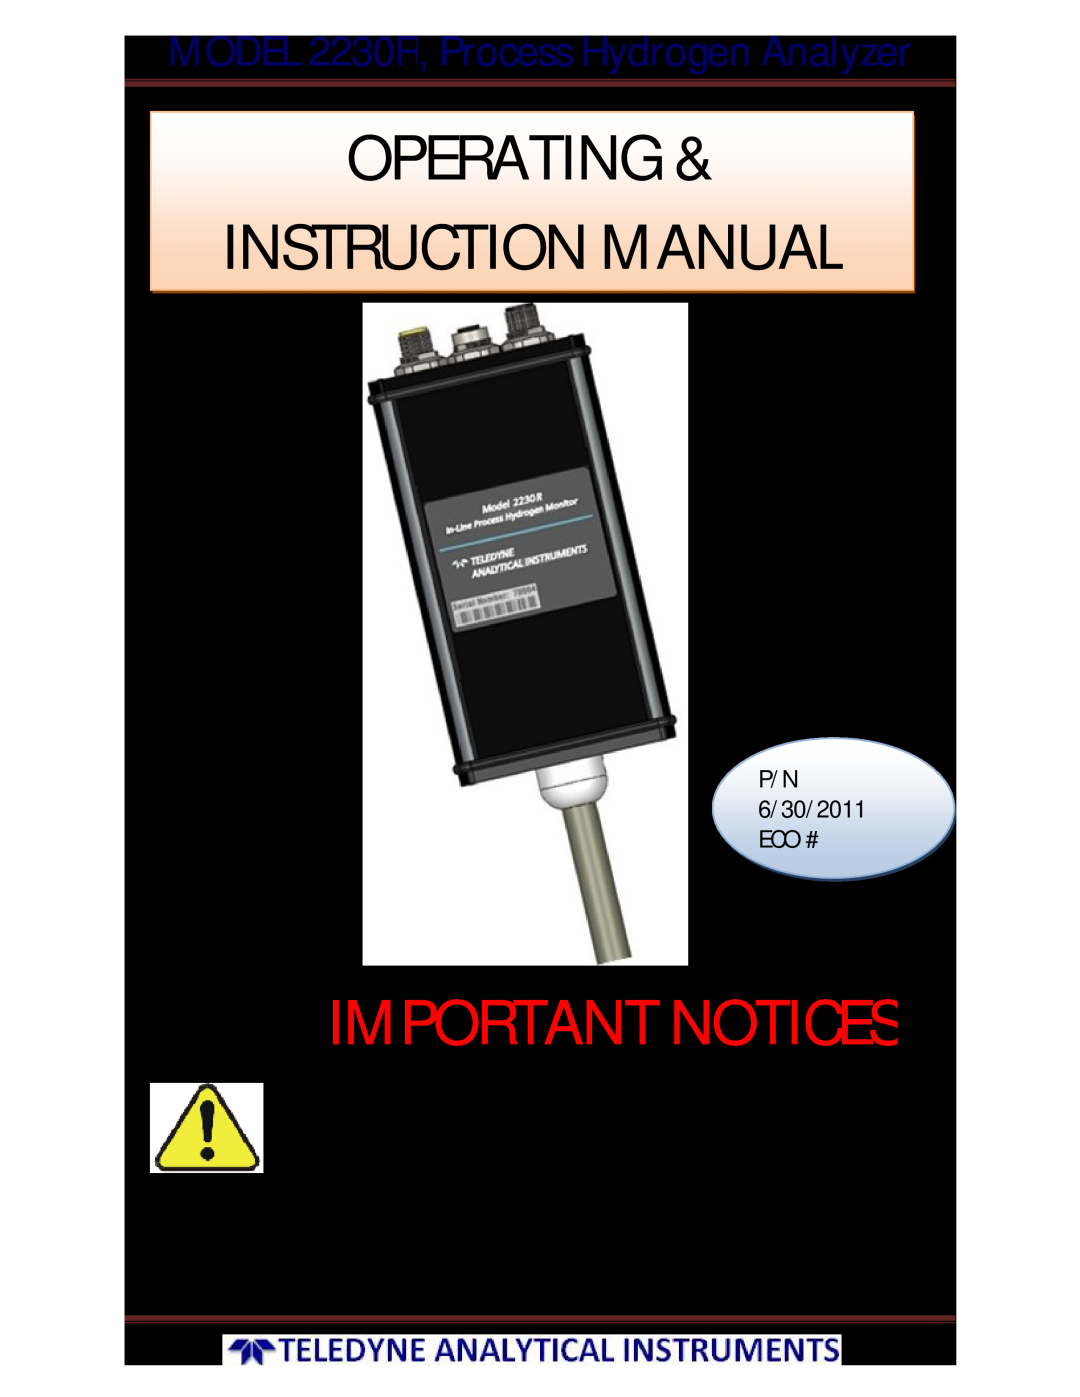 Teledyne instruction manual MODEL 2230R, Process Hydrogen Analyzer, P/N 6/30/2011 ECO #, Important Notices, Page 